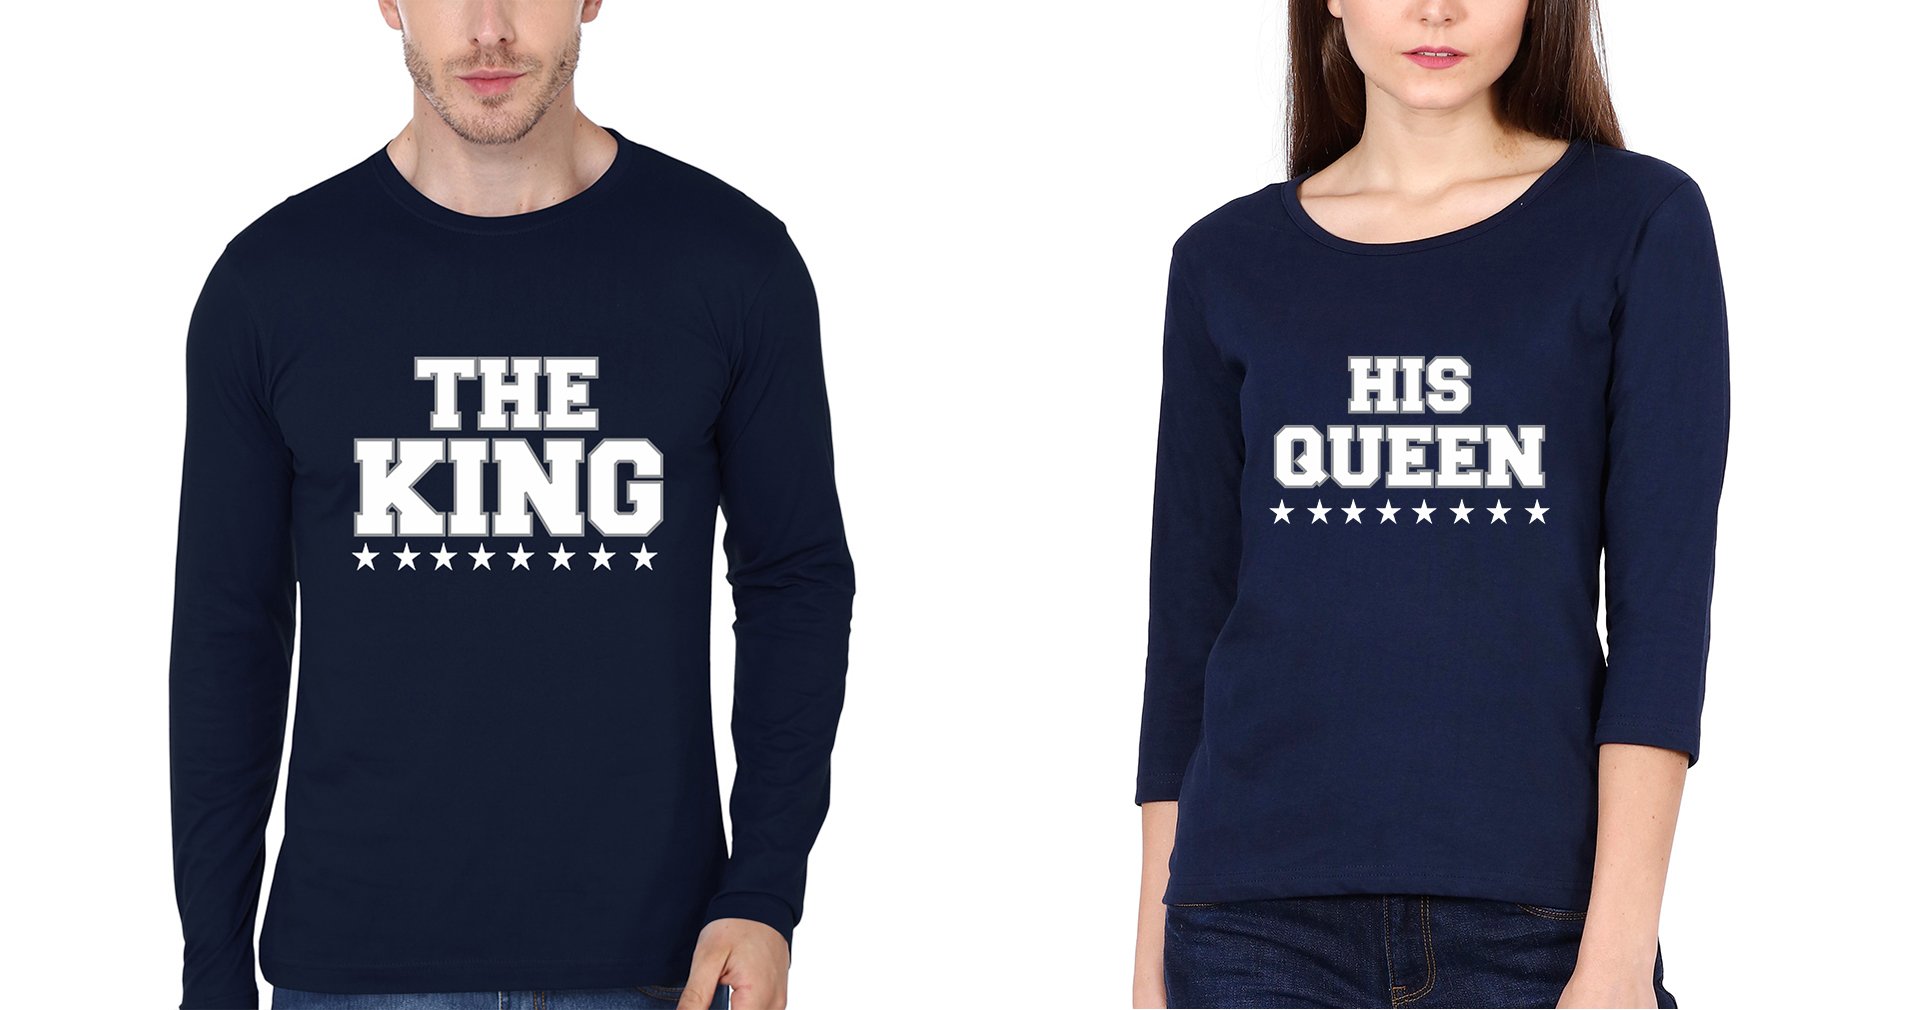 The King His Queen Couple Full Sleeves T-Shirts -FunkyTees